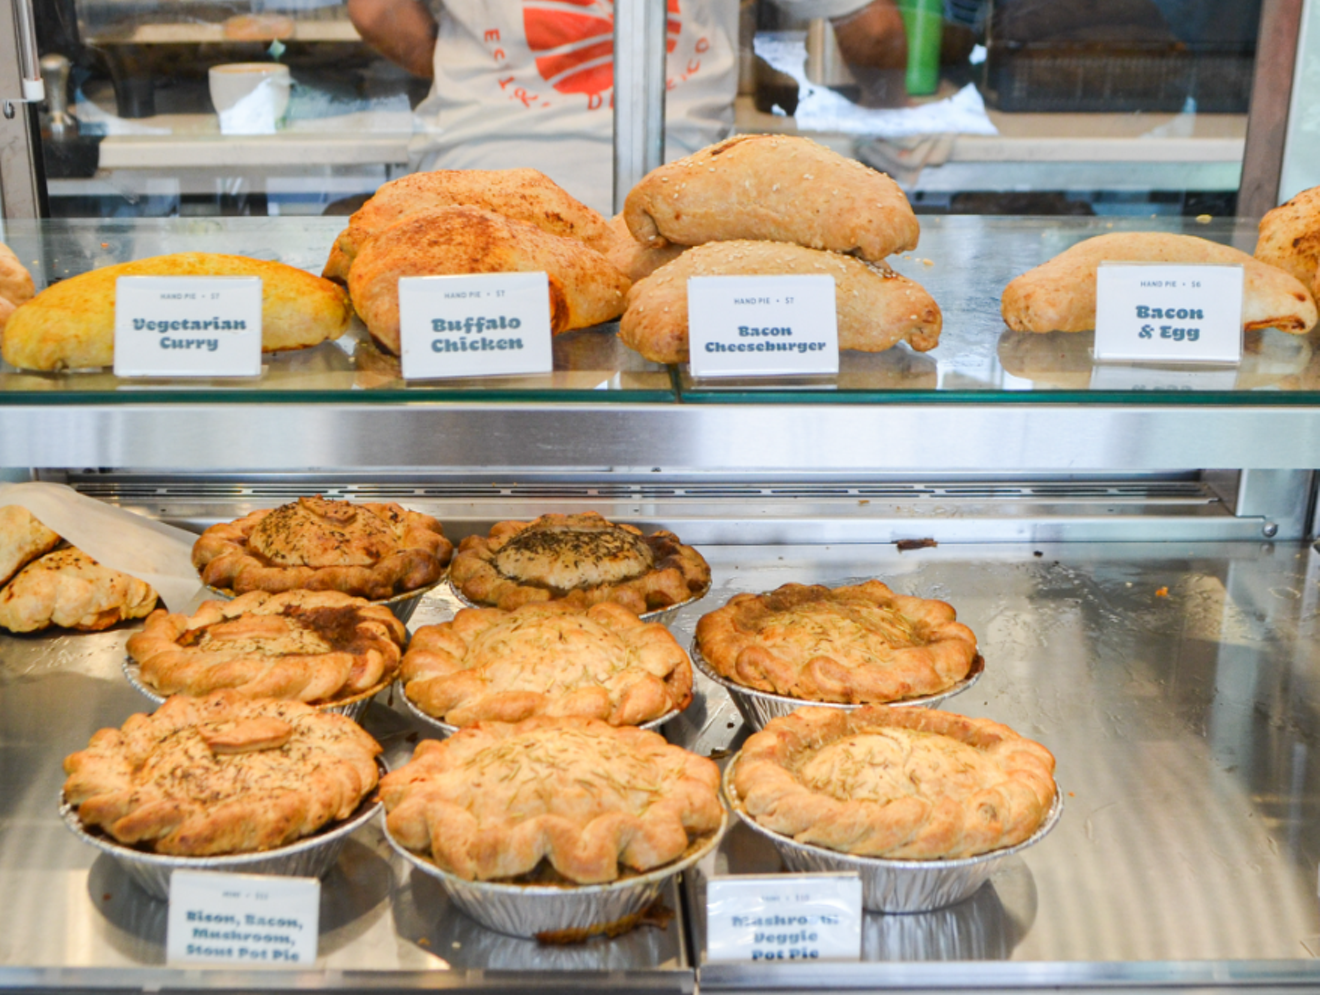 Legacy Pie serves both sweet and savory pies.